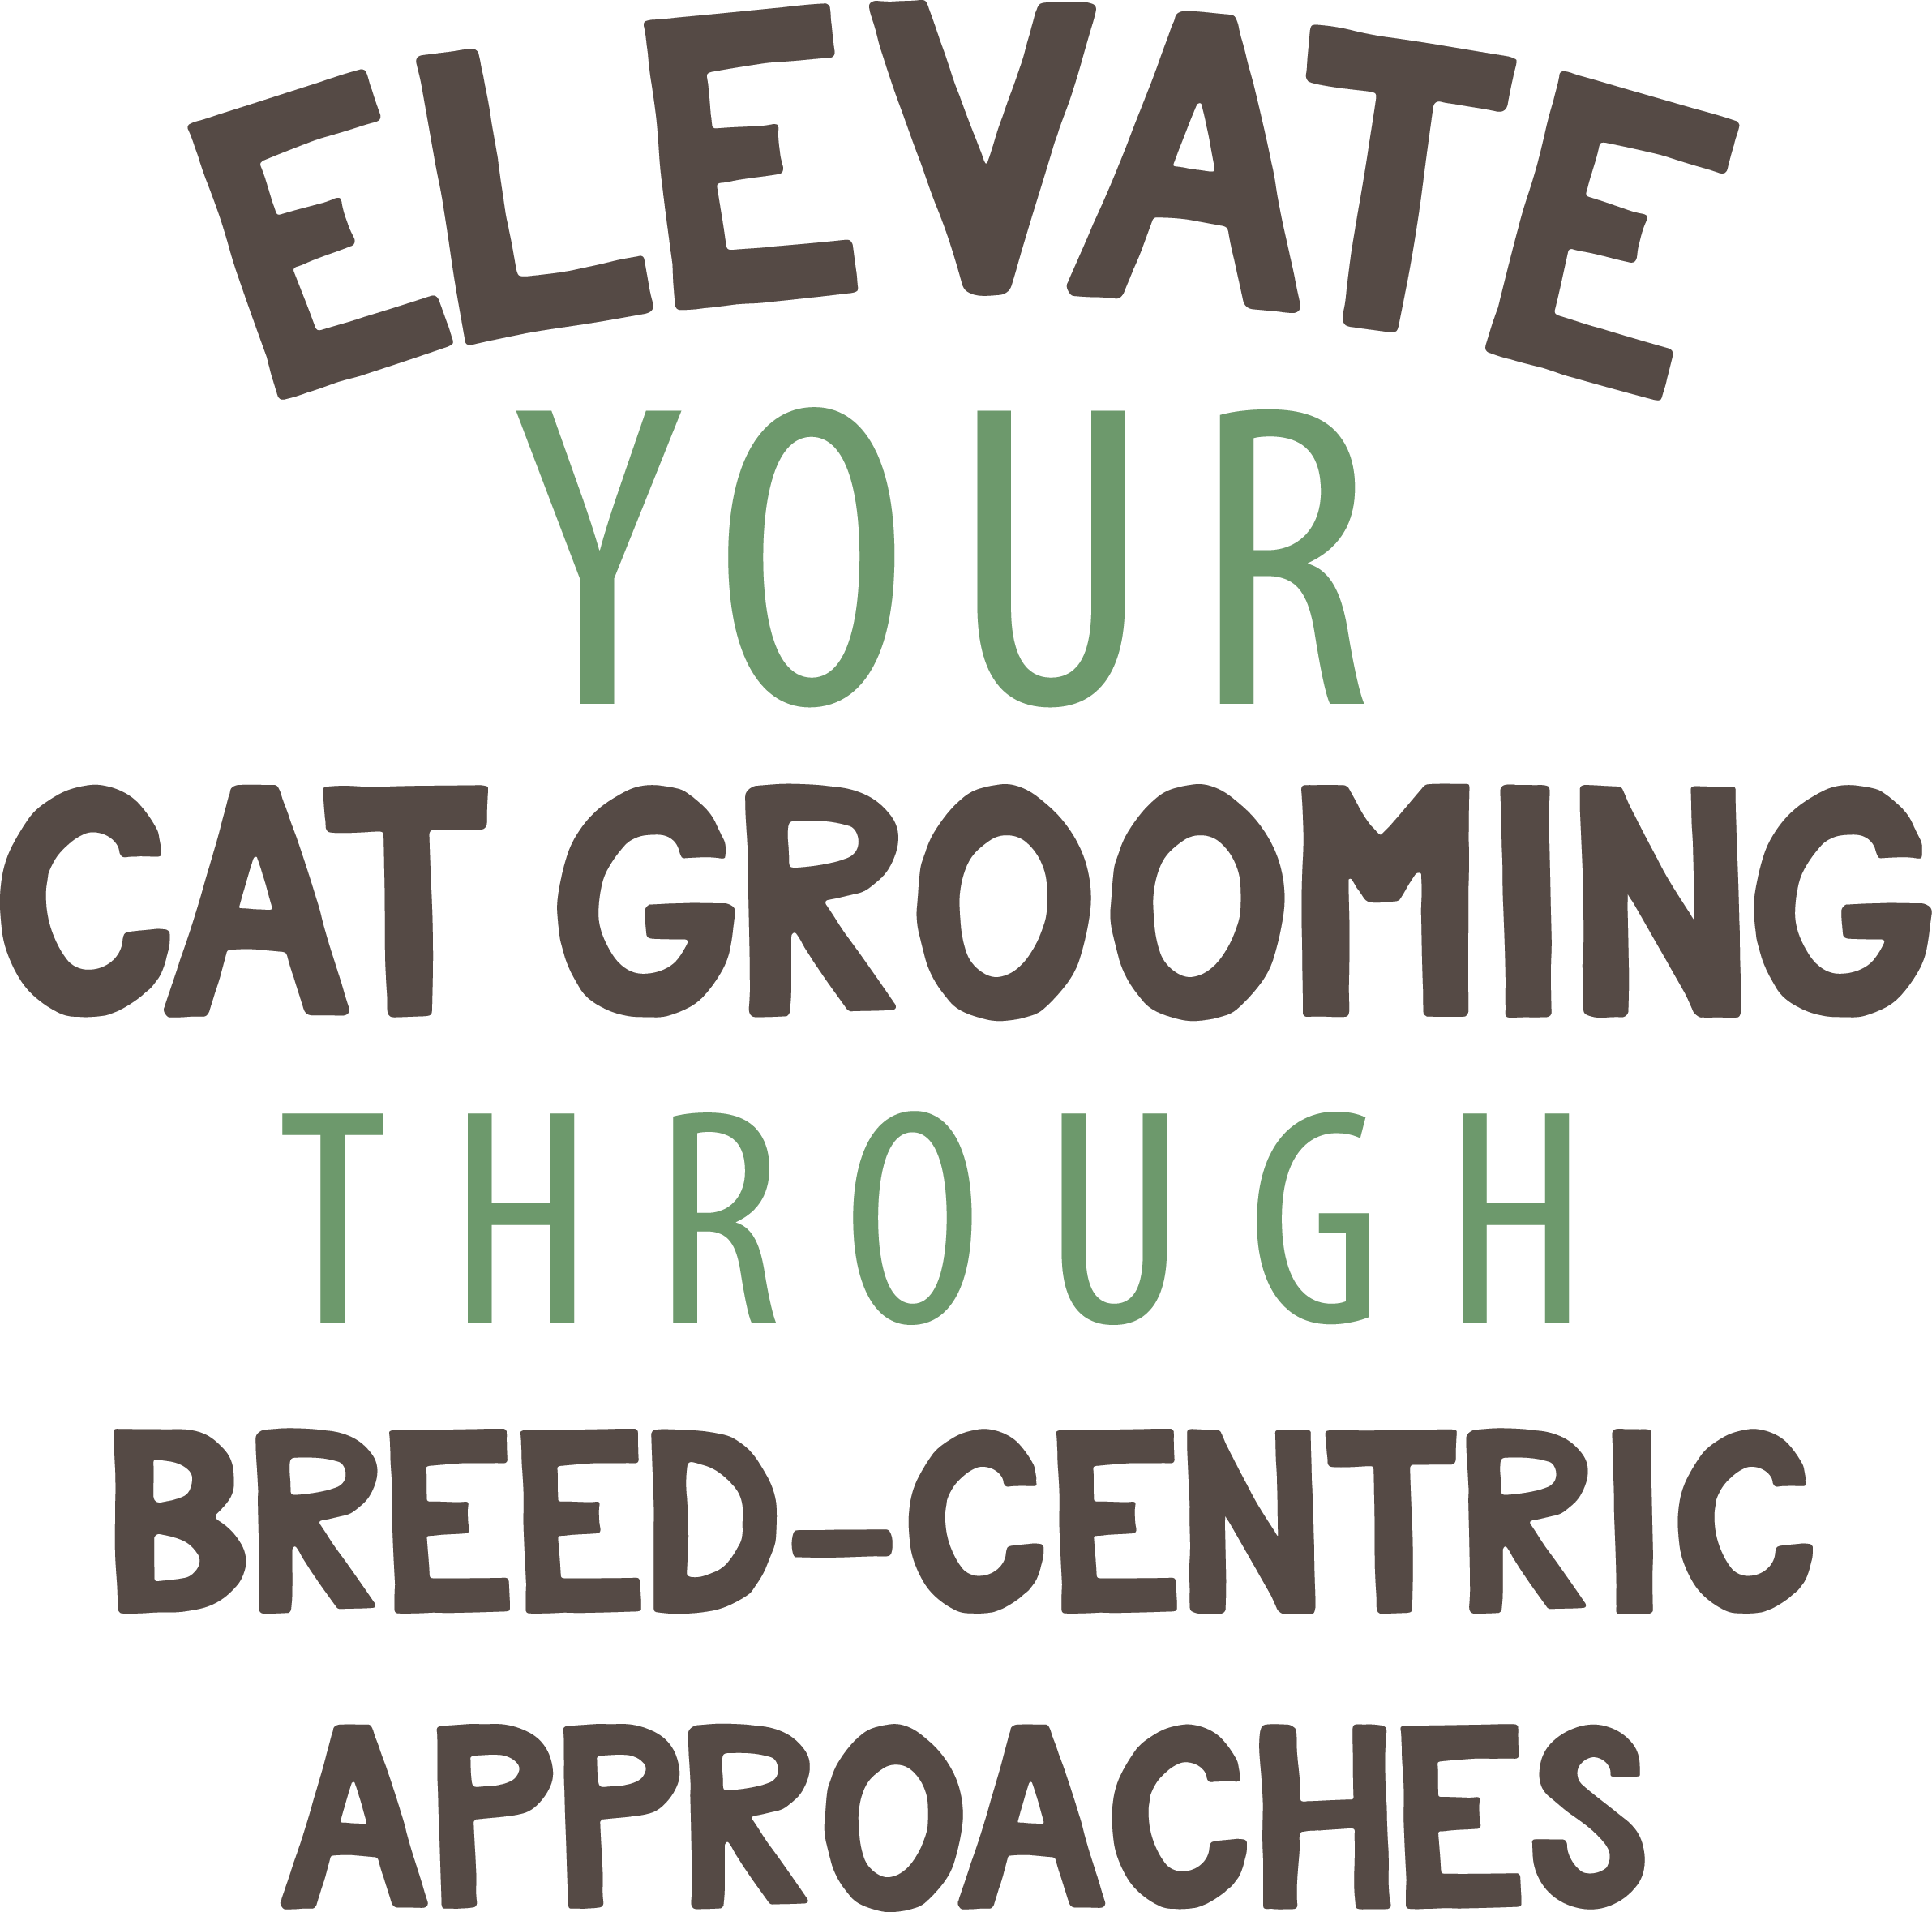 Elevate Your Cat Grooming Through Breed-Centric Approaches